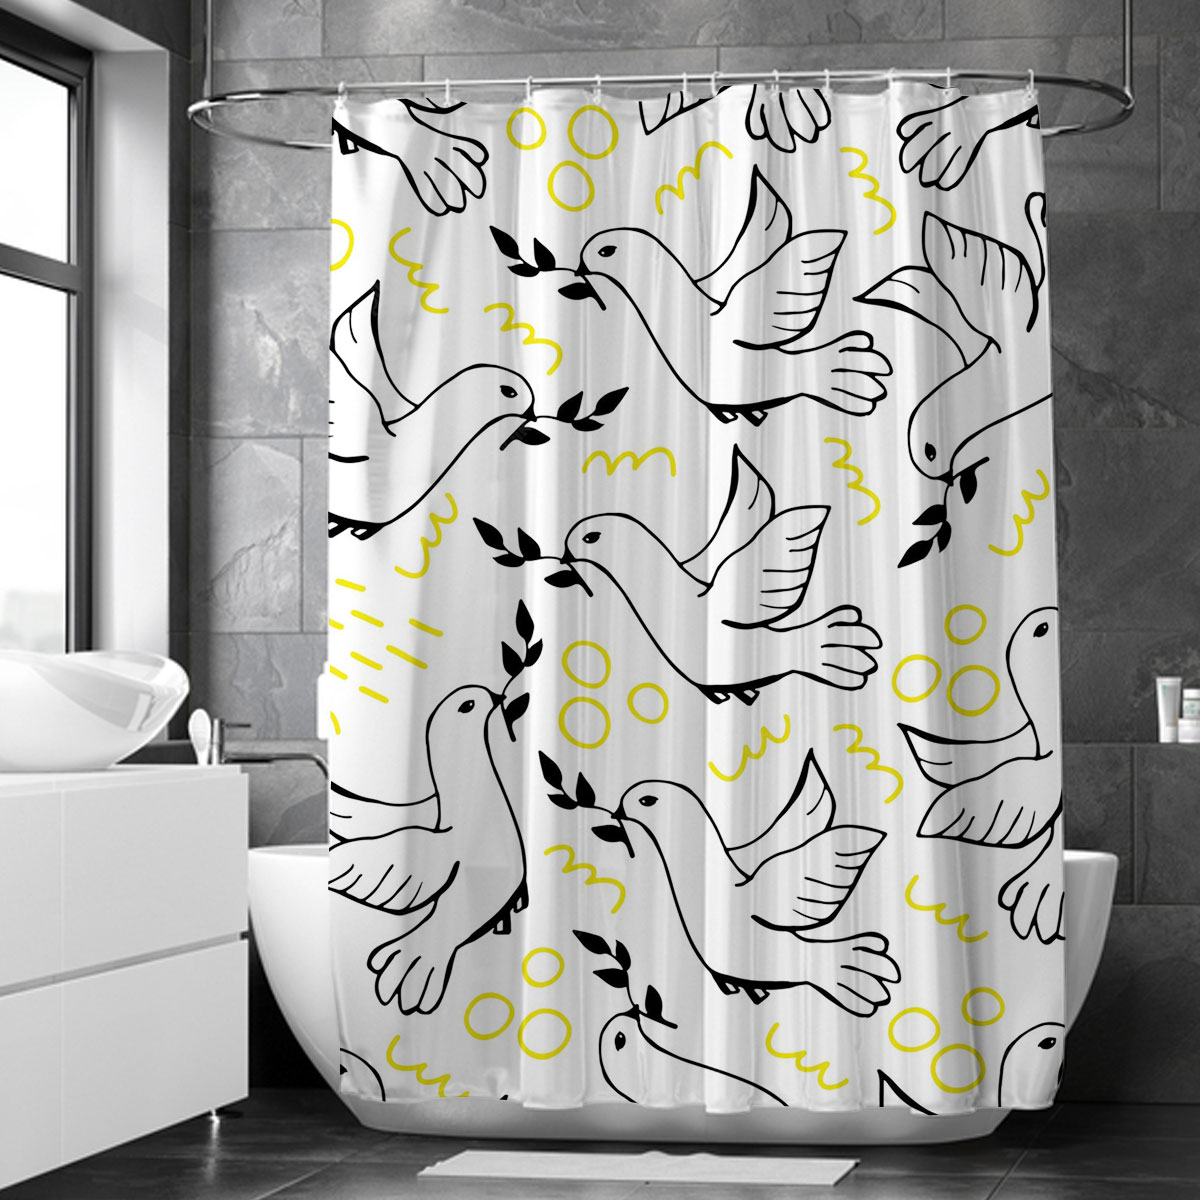 Coon White Dove Flying Shower Curtain 6